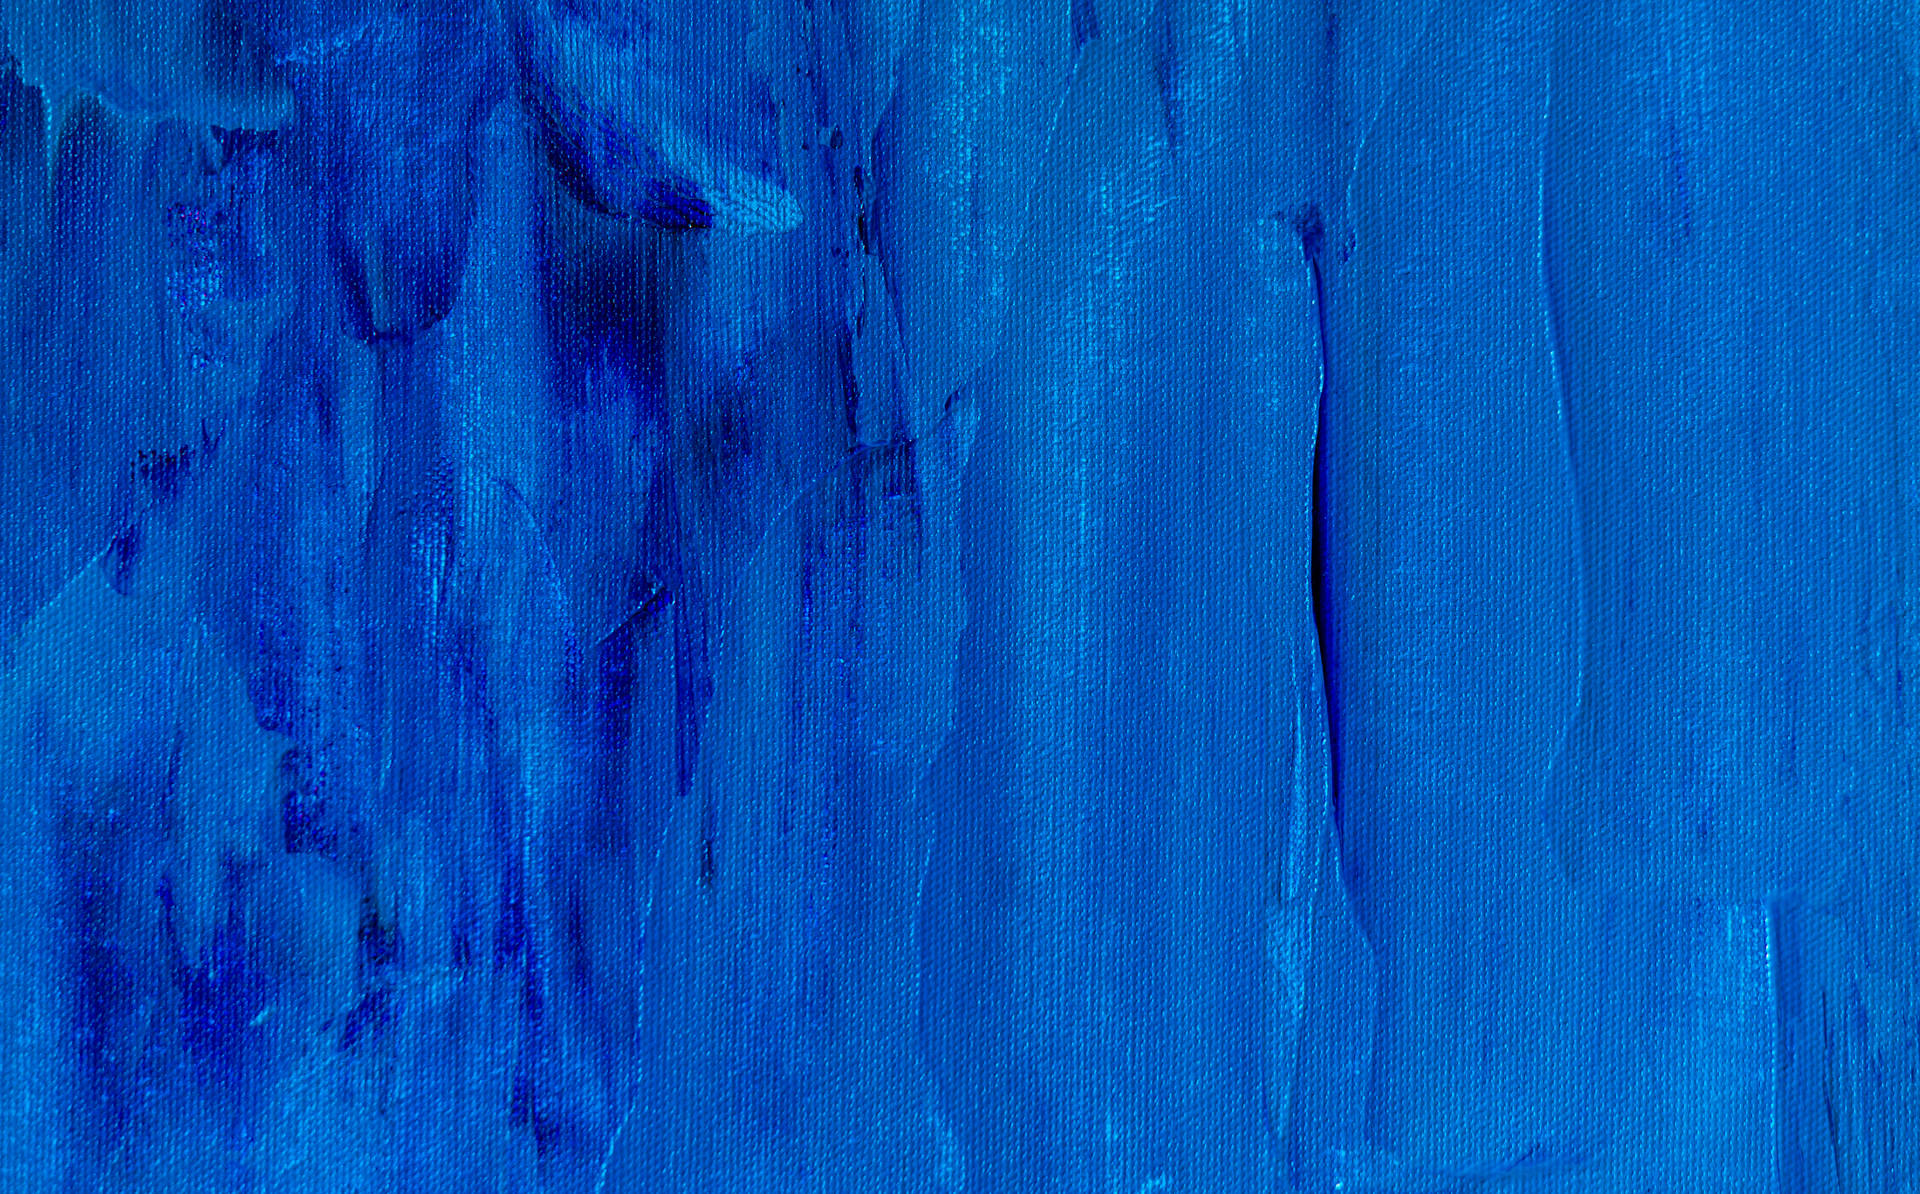 Abstract Blue Textured Painting Background